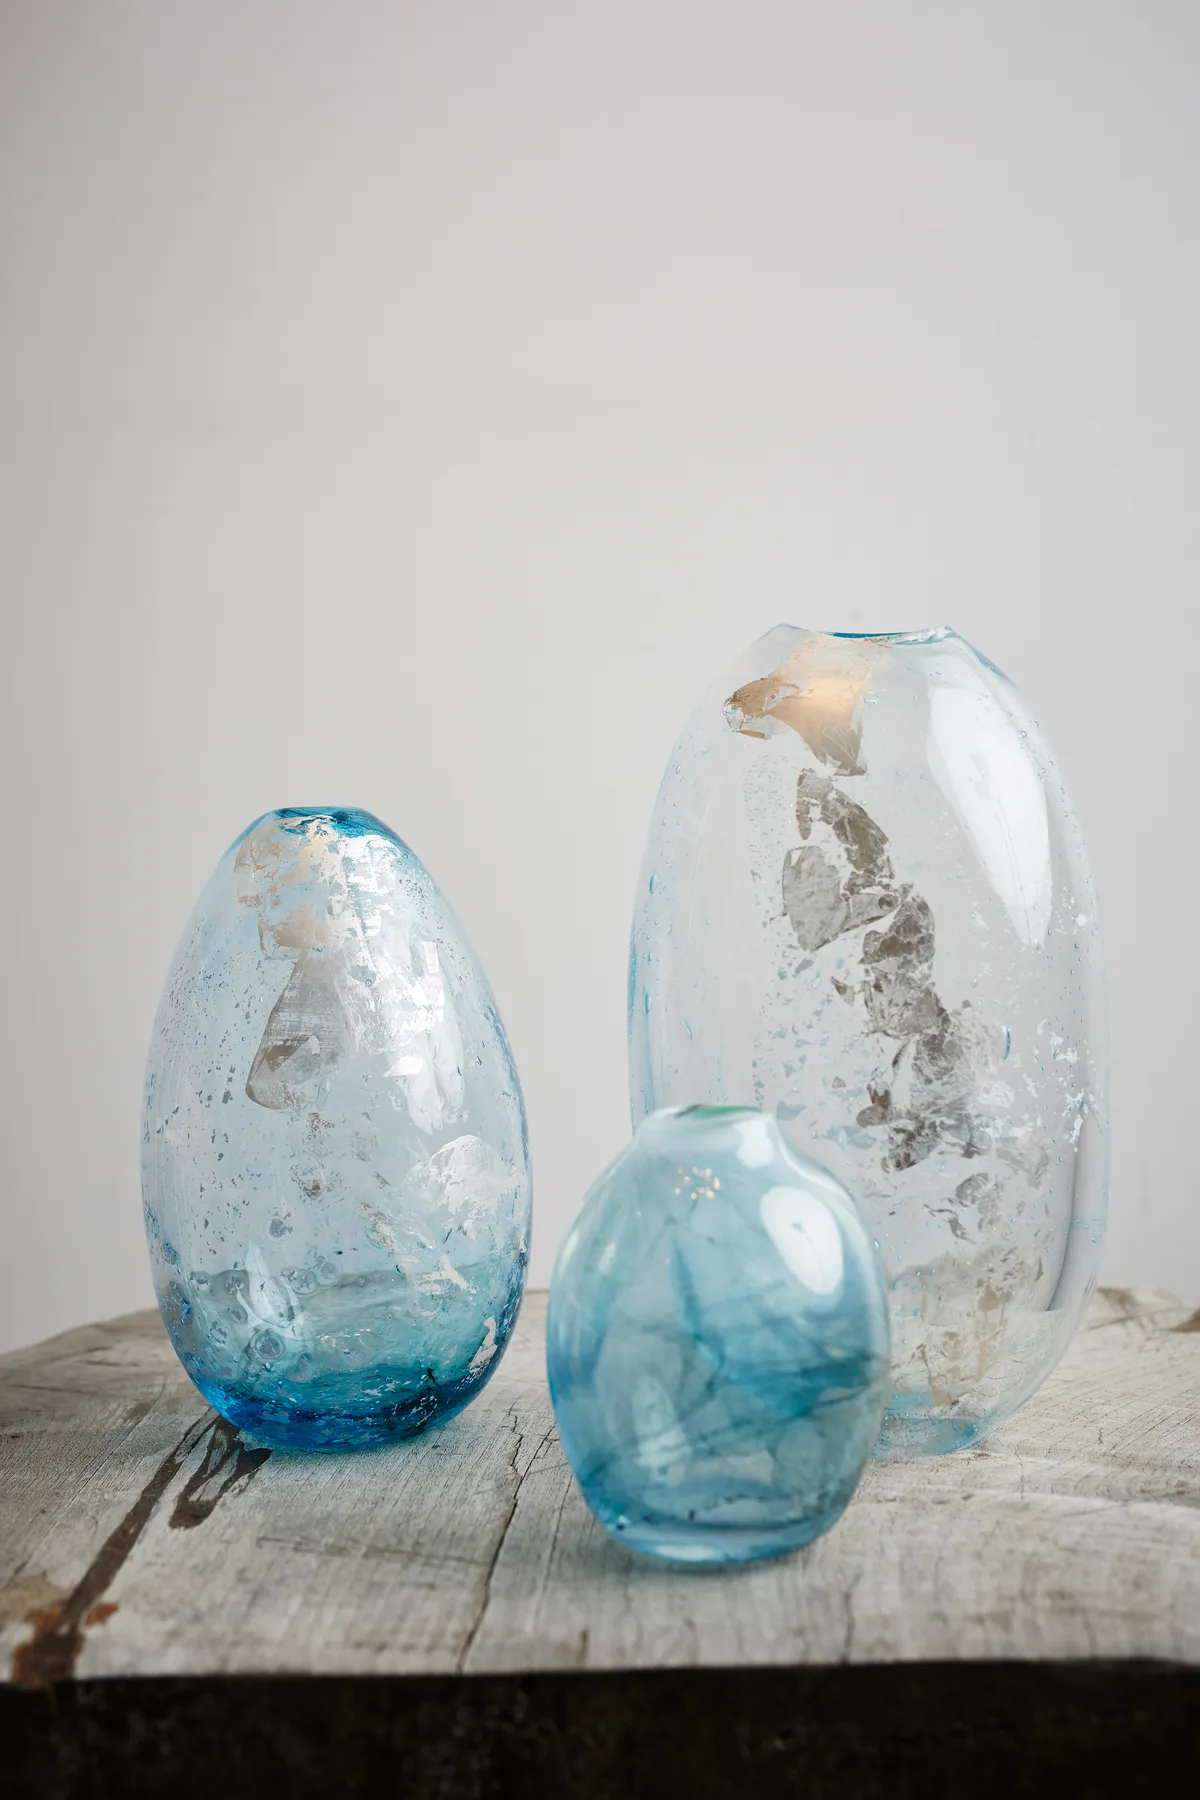 Three of glassblower Laura Smith's handmade glass vessels with flecks of silver